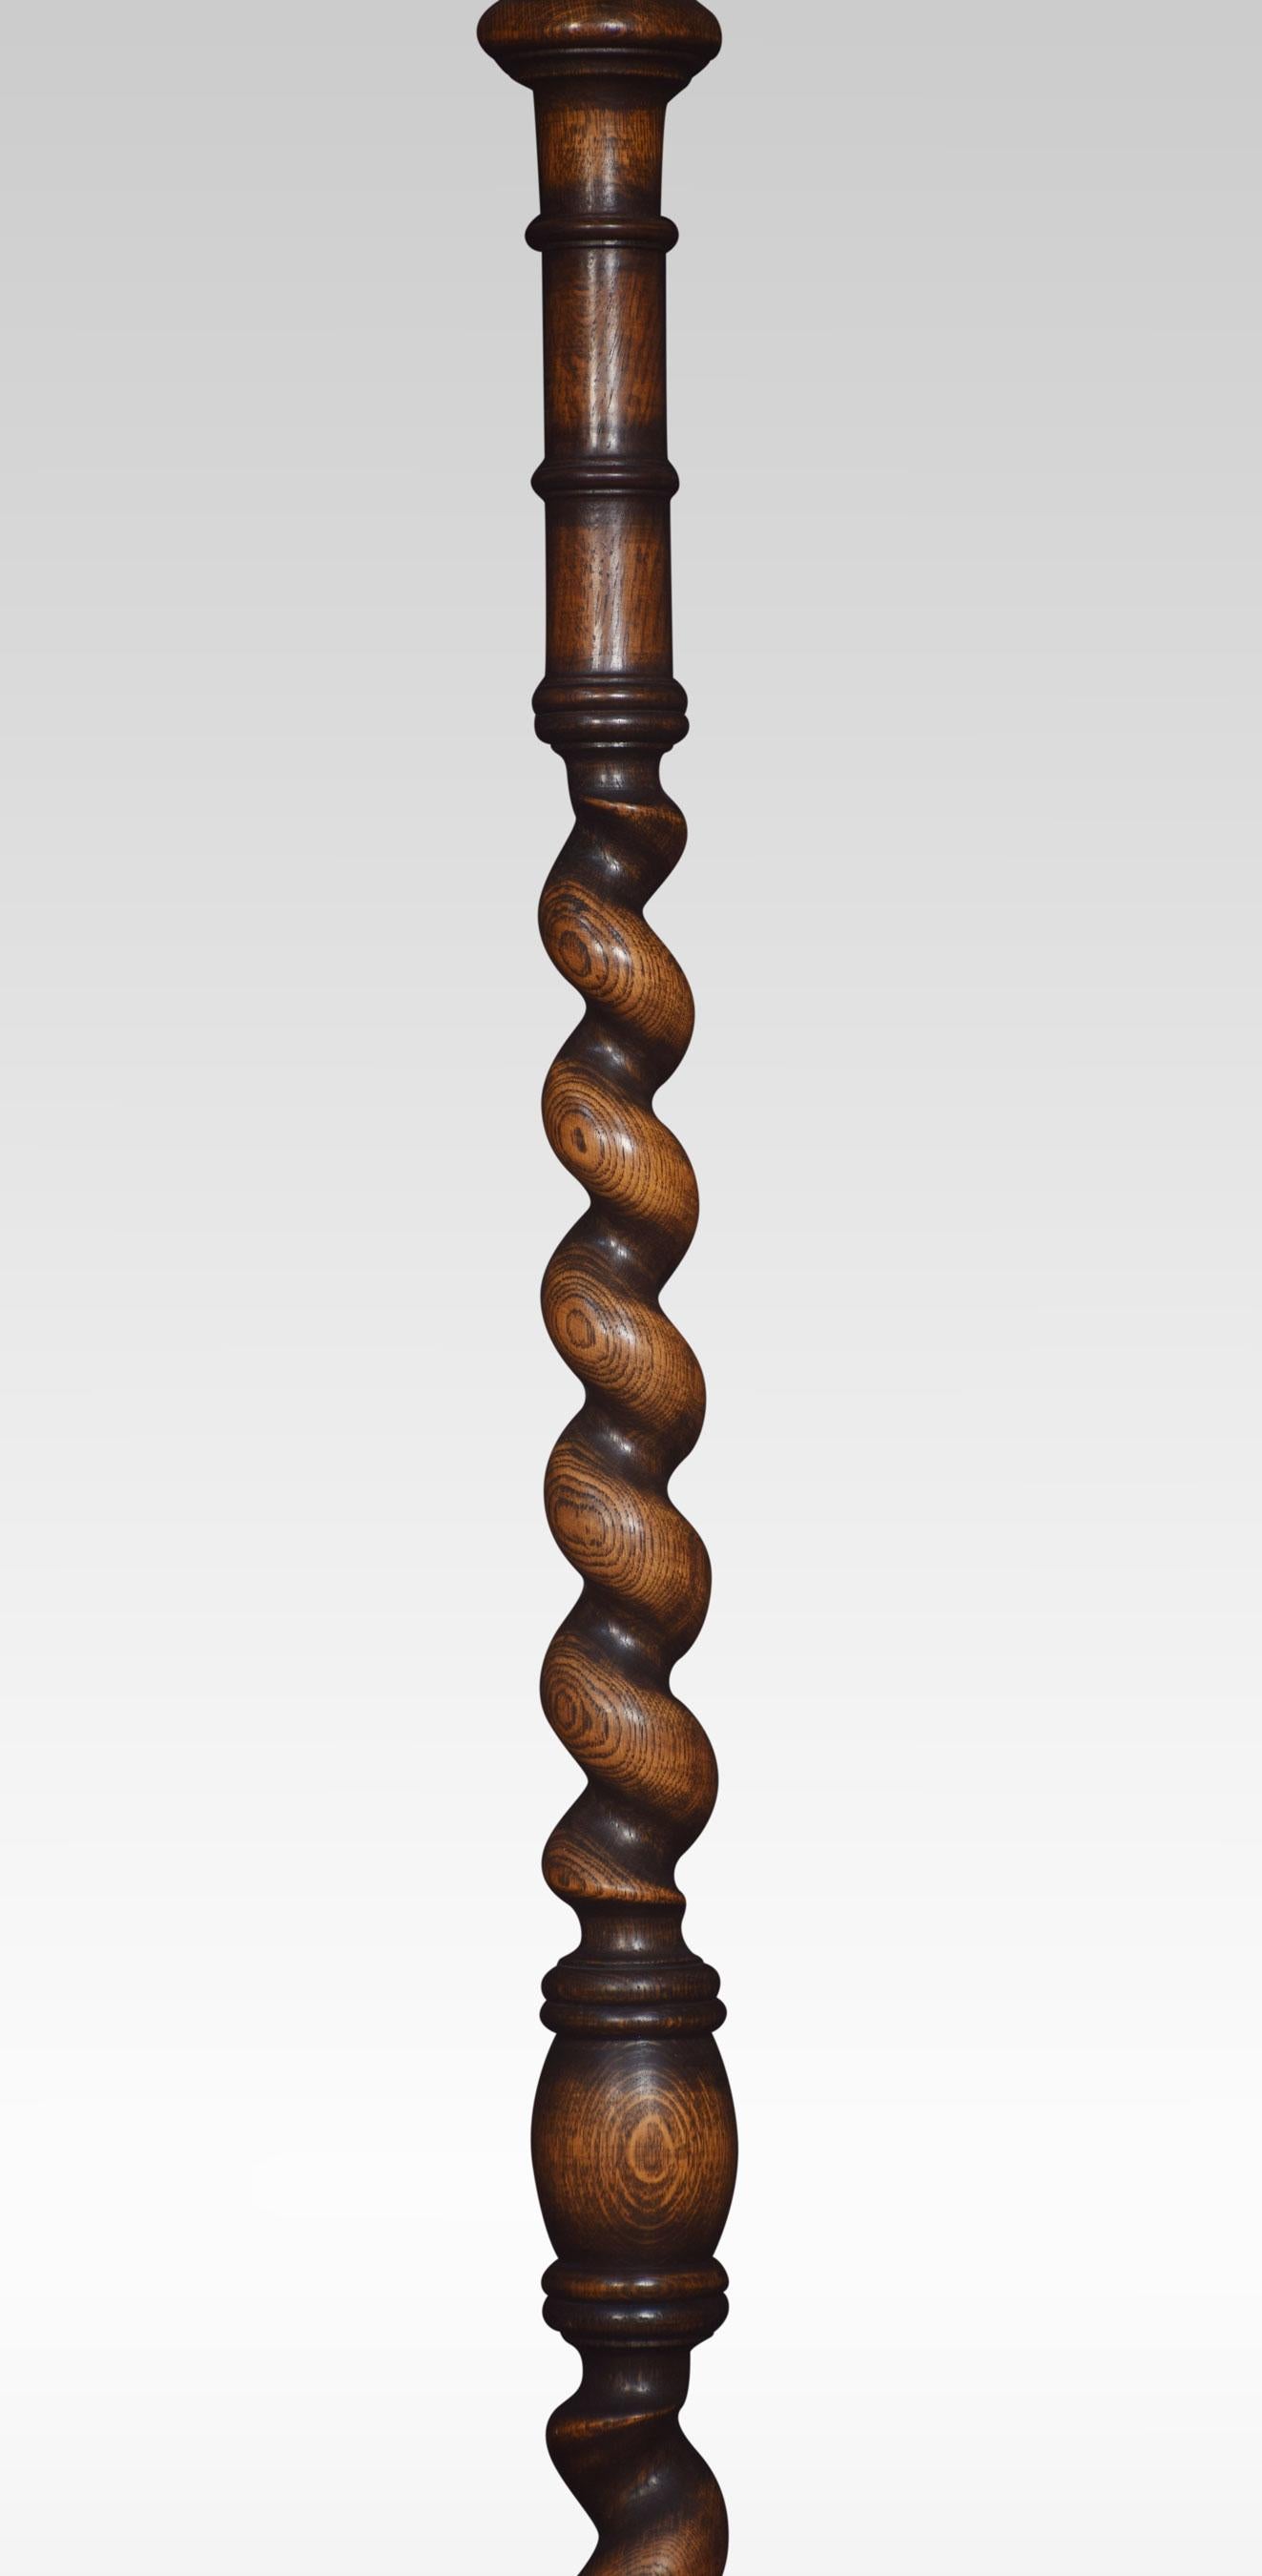 Oak standard lamp, the barley twist carved column raised up on circular base.
Dimensions
Height 64 inches
Width 13.5 inches
Depth 13.5 inches.